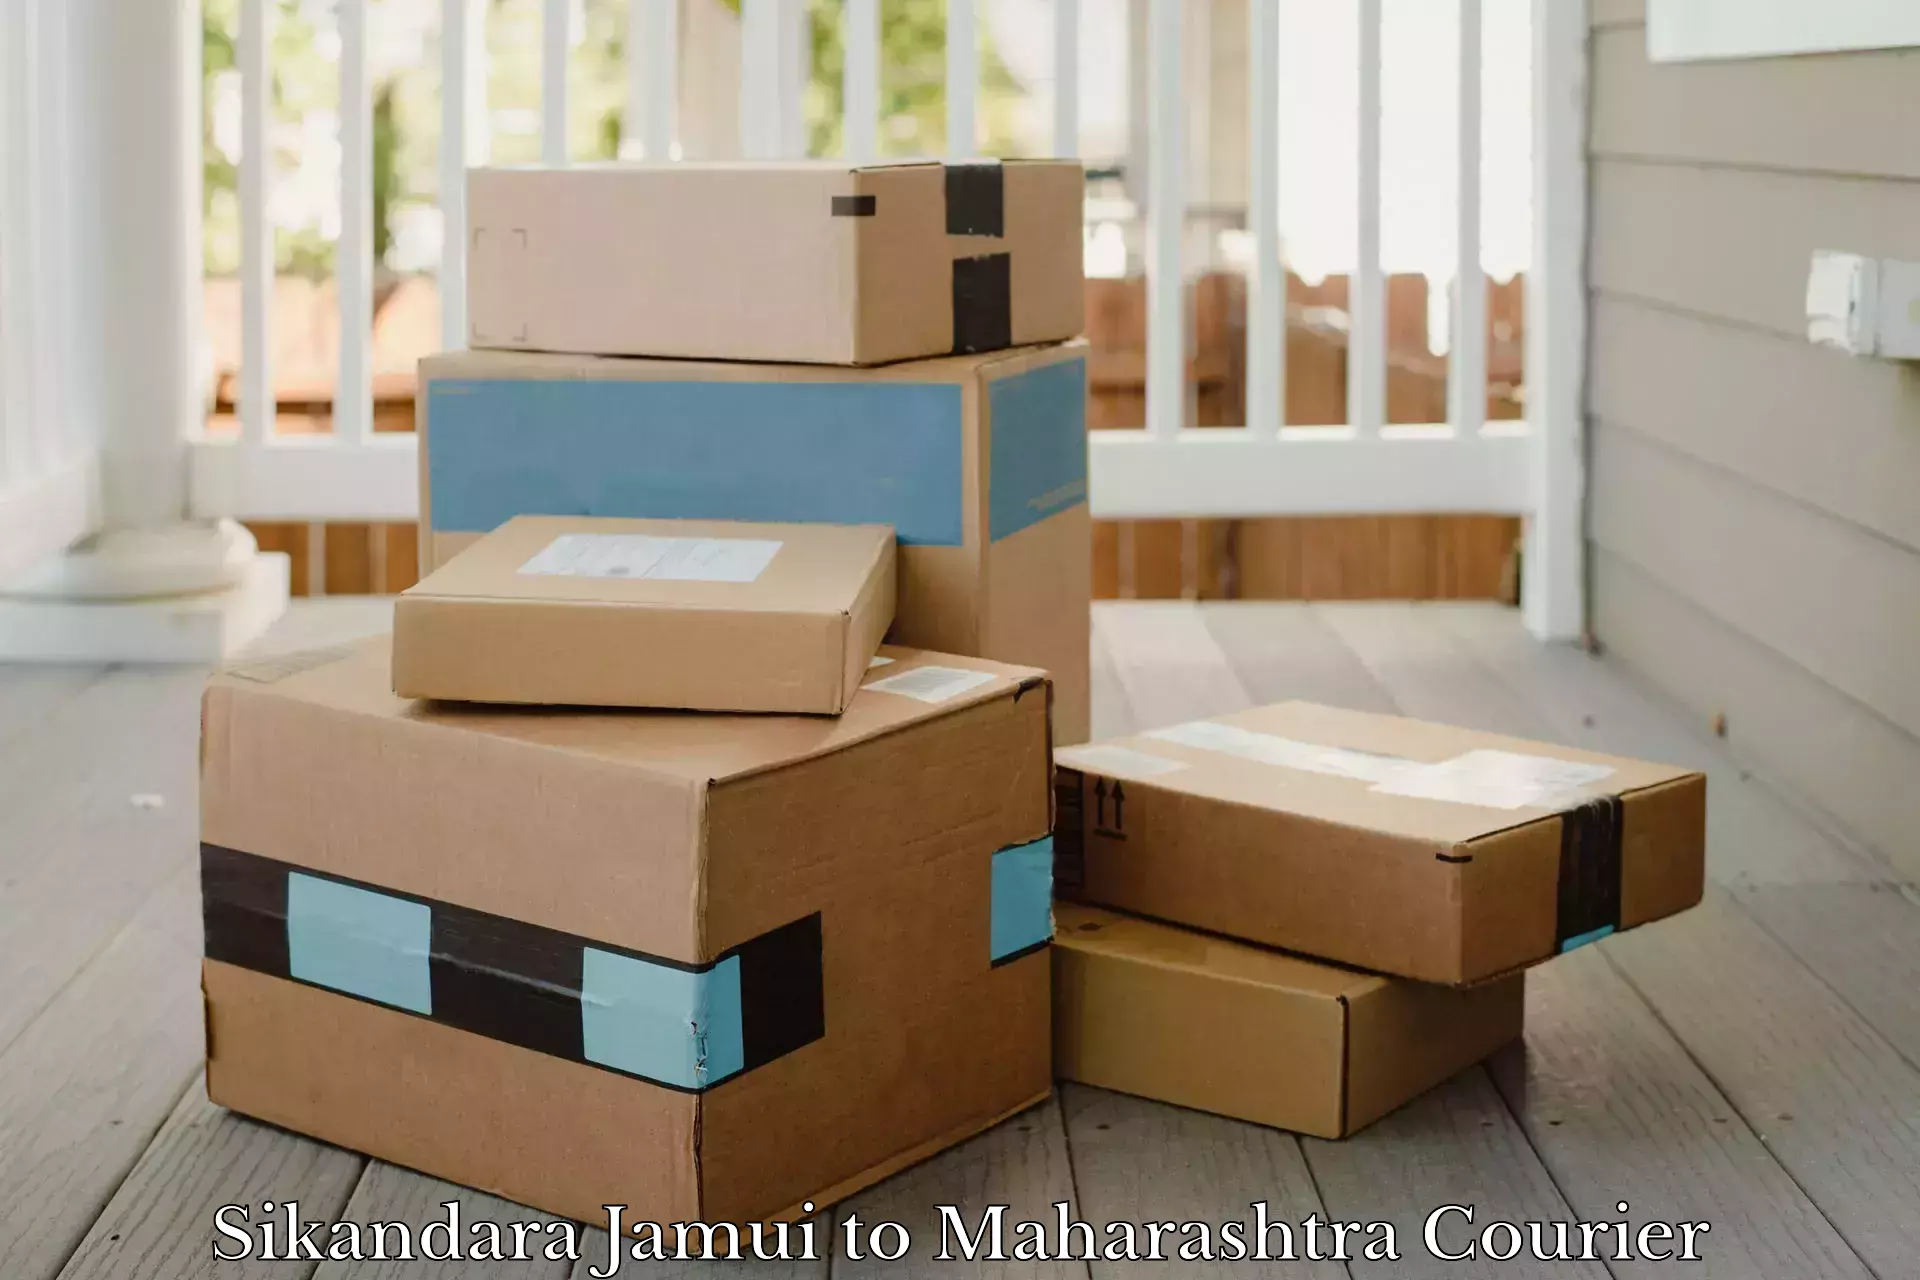 Reliable courier service in Sikandara Jamui to Dusarbid